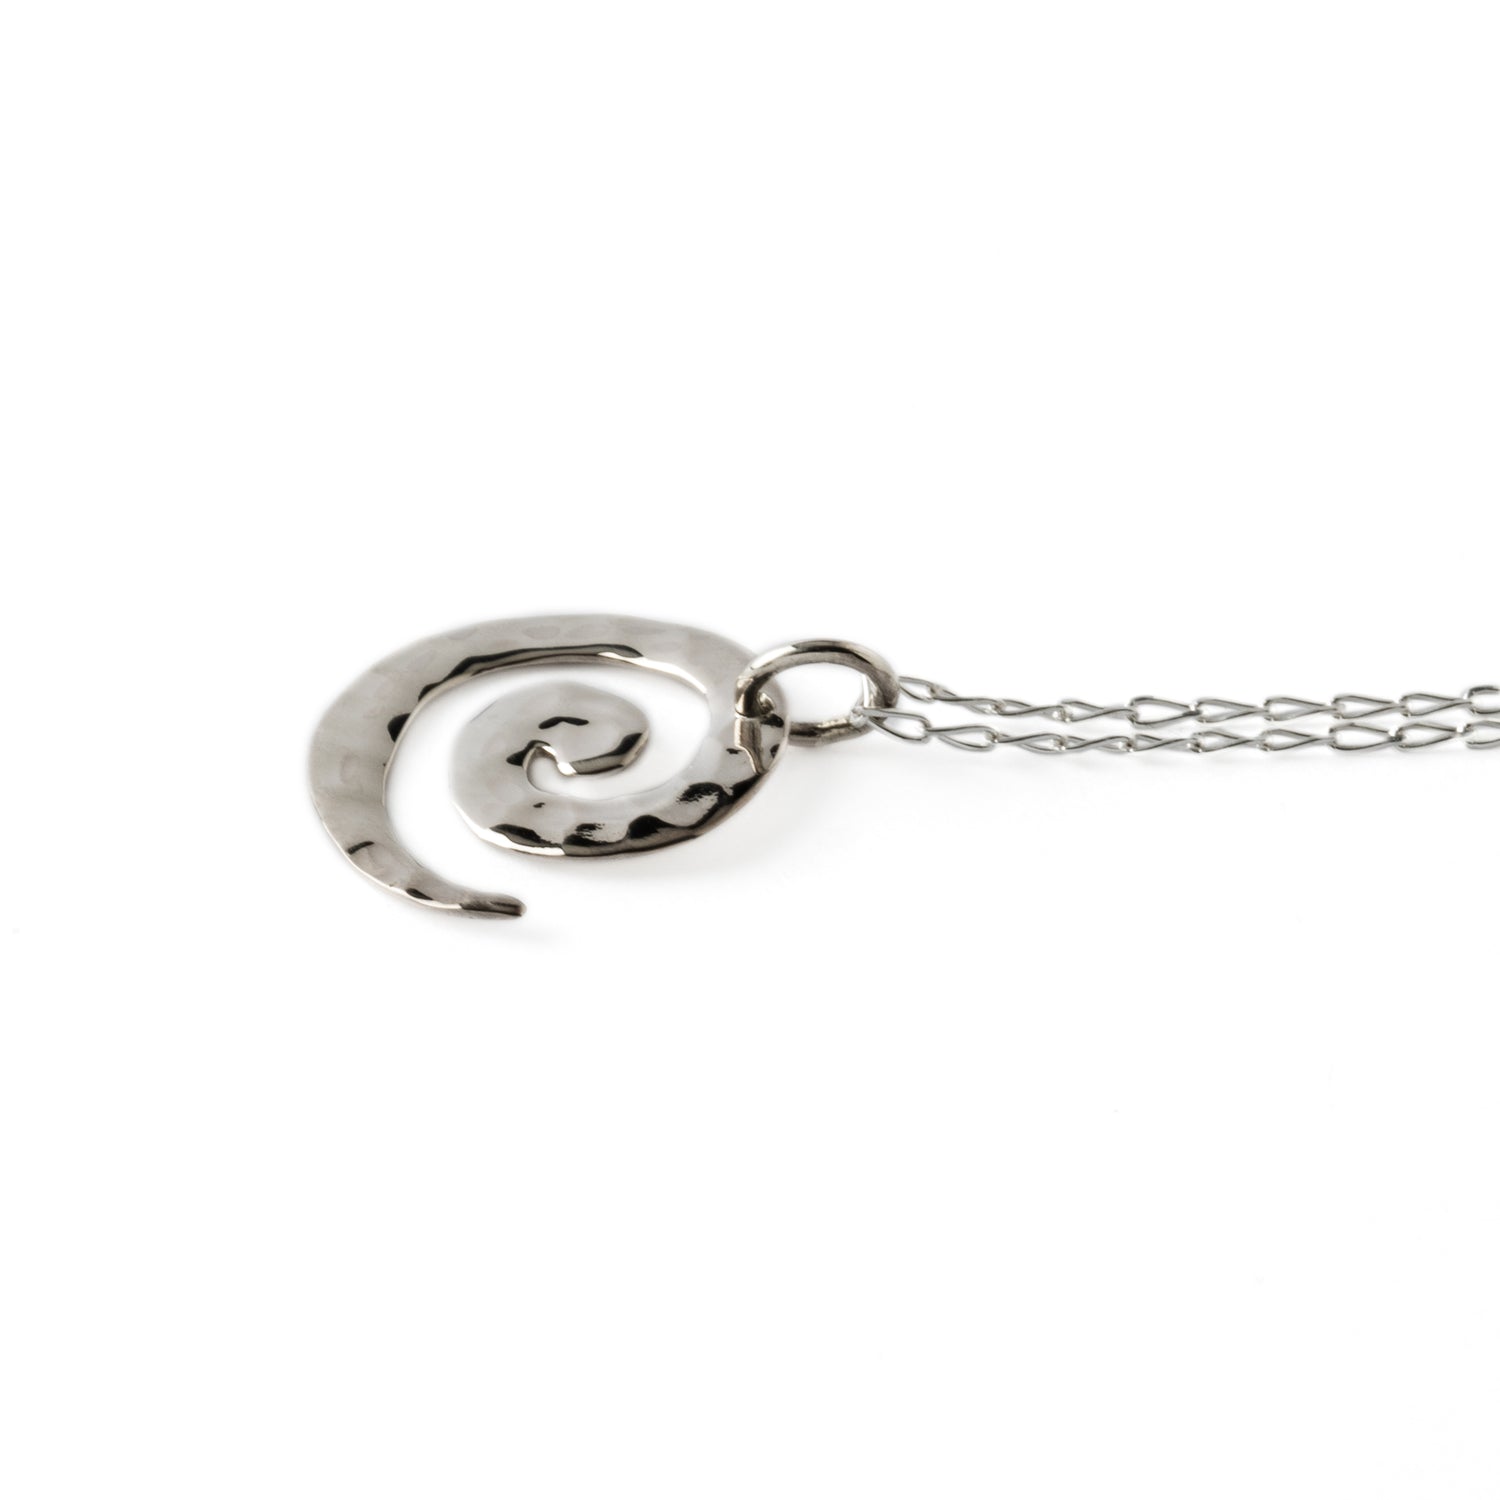 Hammered silver spiral charm necklace side view